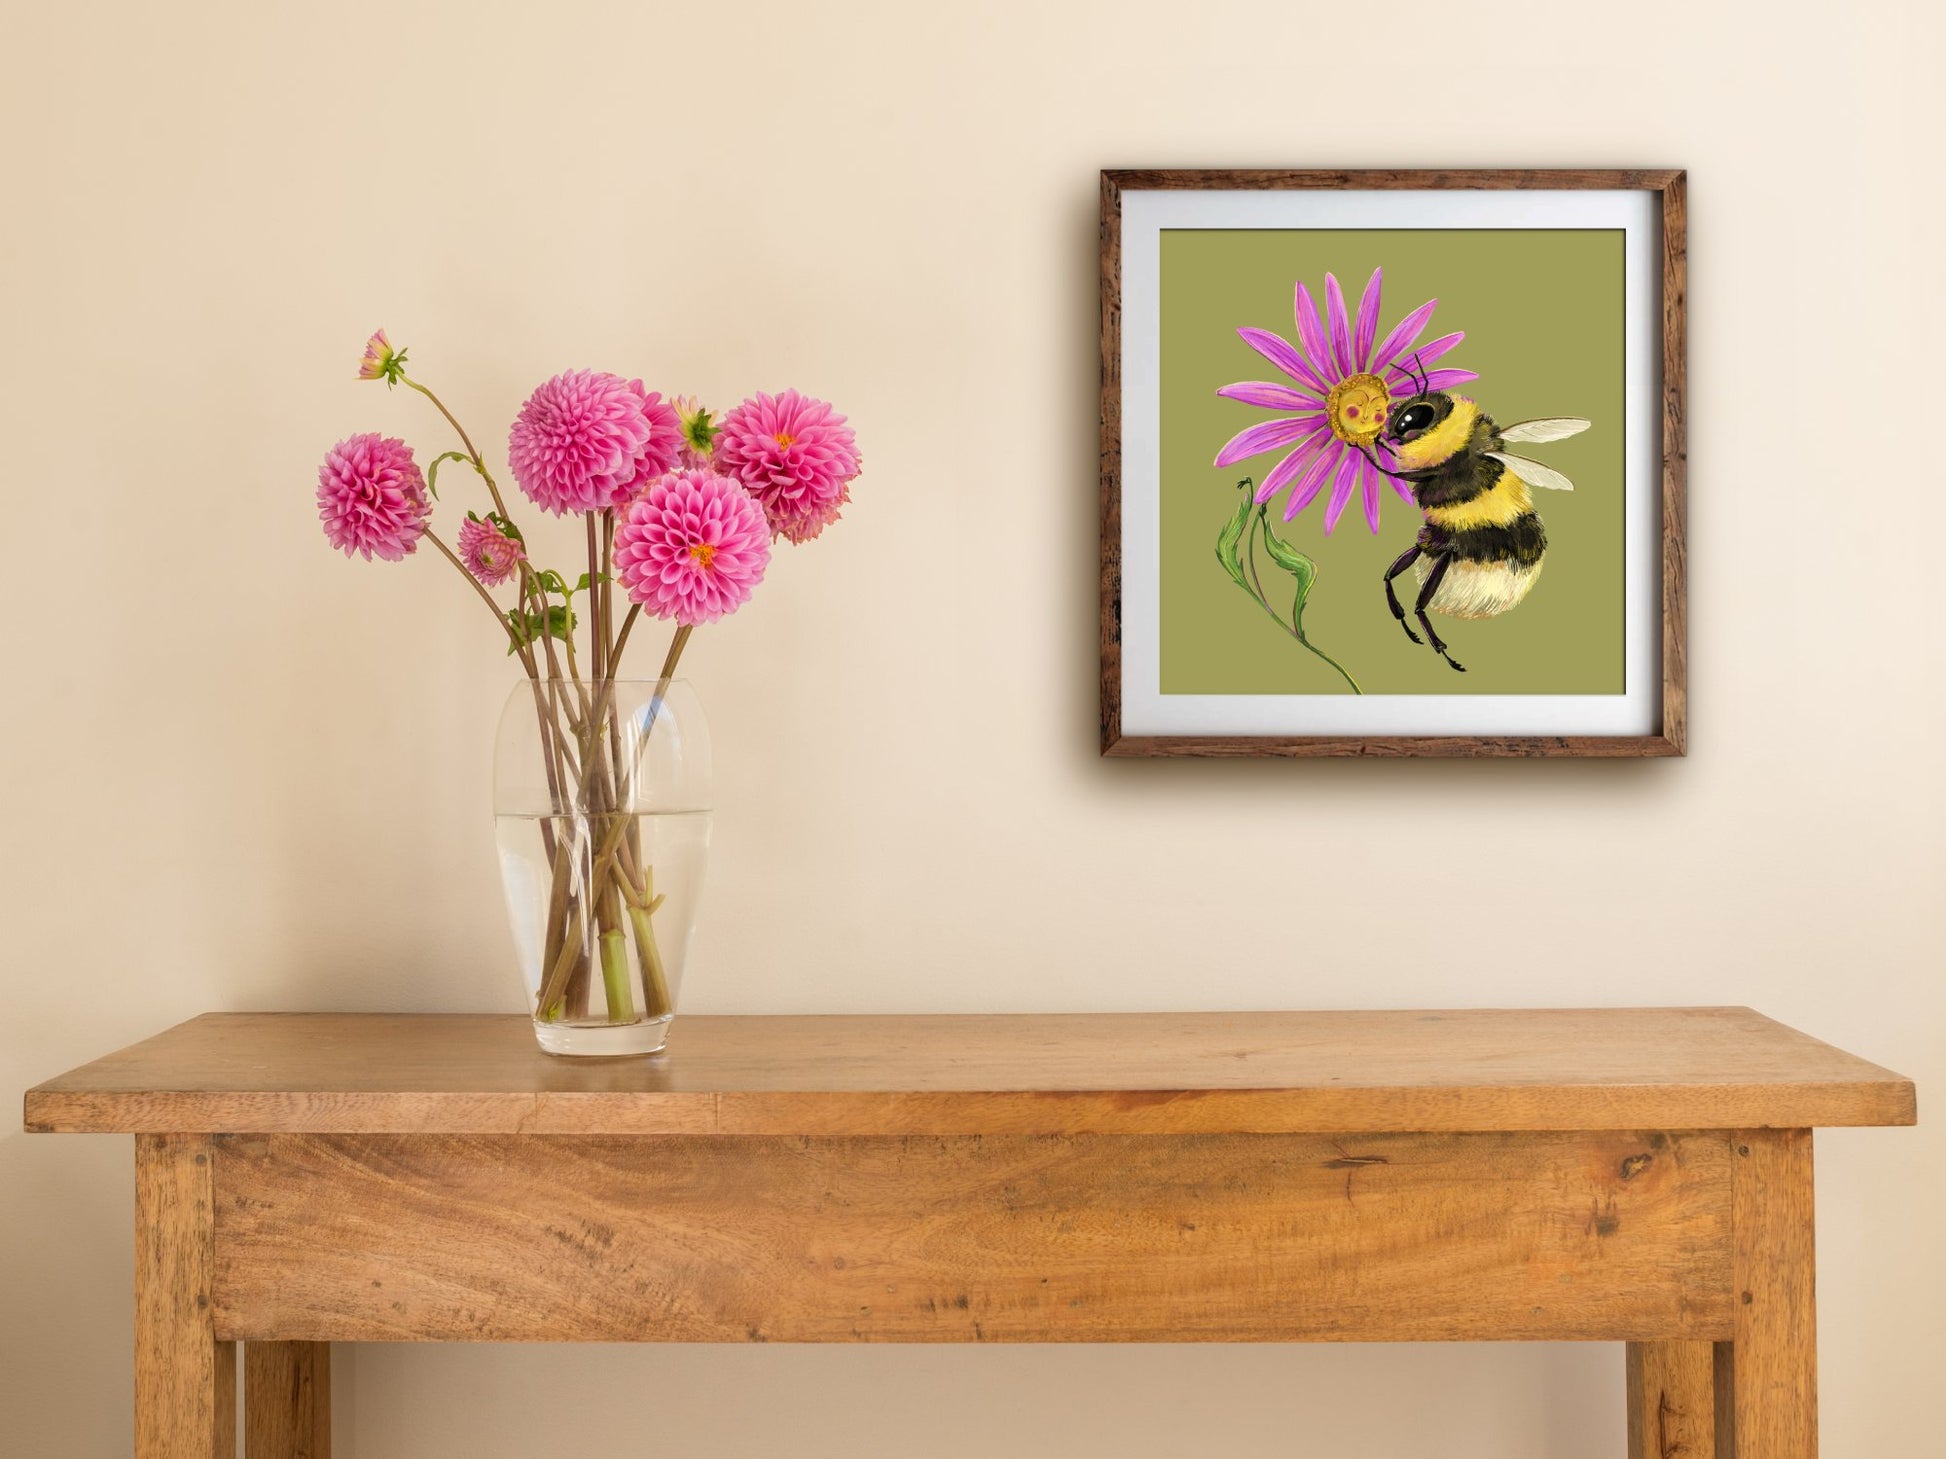 Anna Seed Art | Art Print - You Are a Beauty to Beehold - Cute illustration, wall art